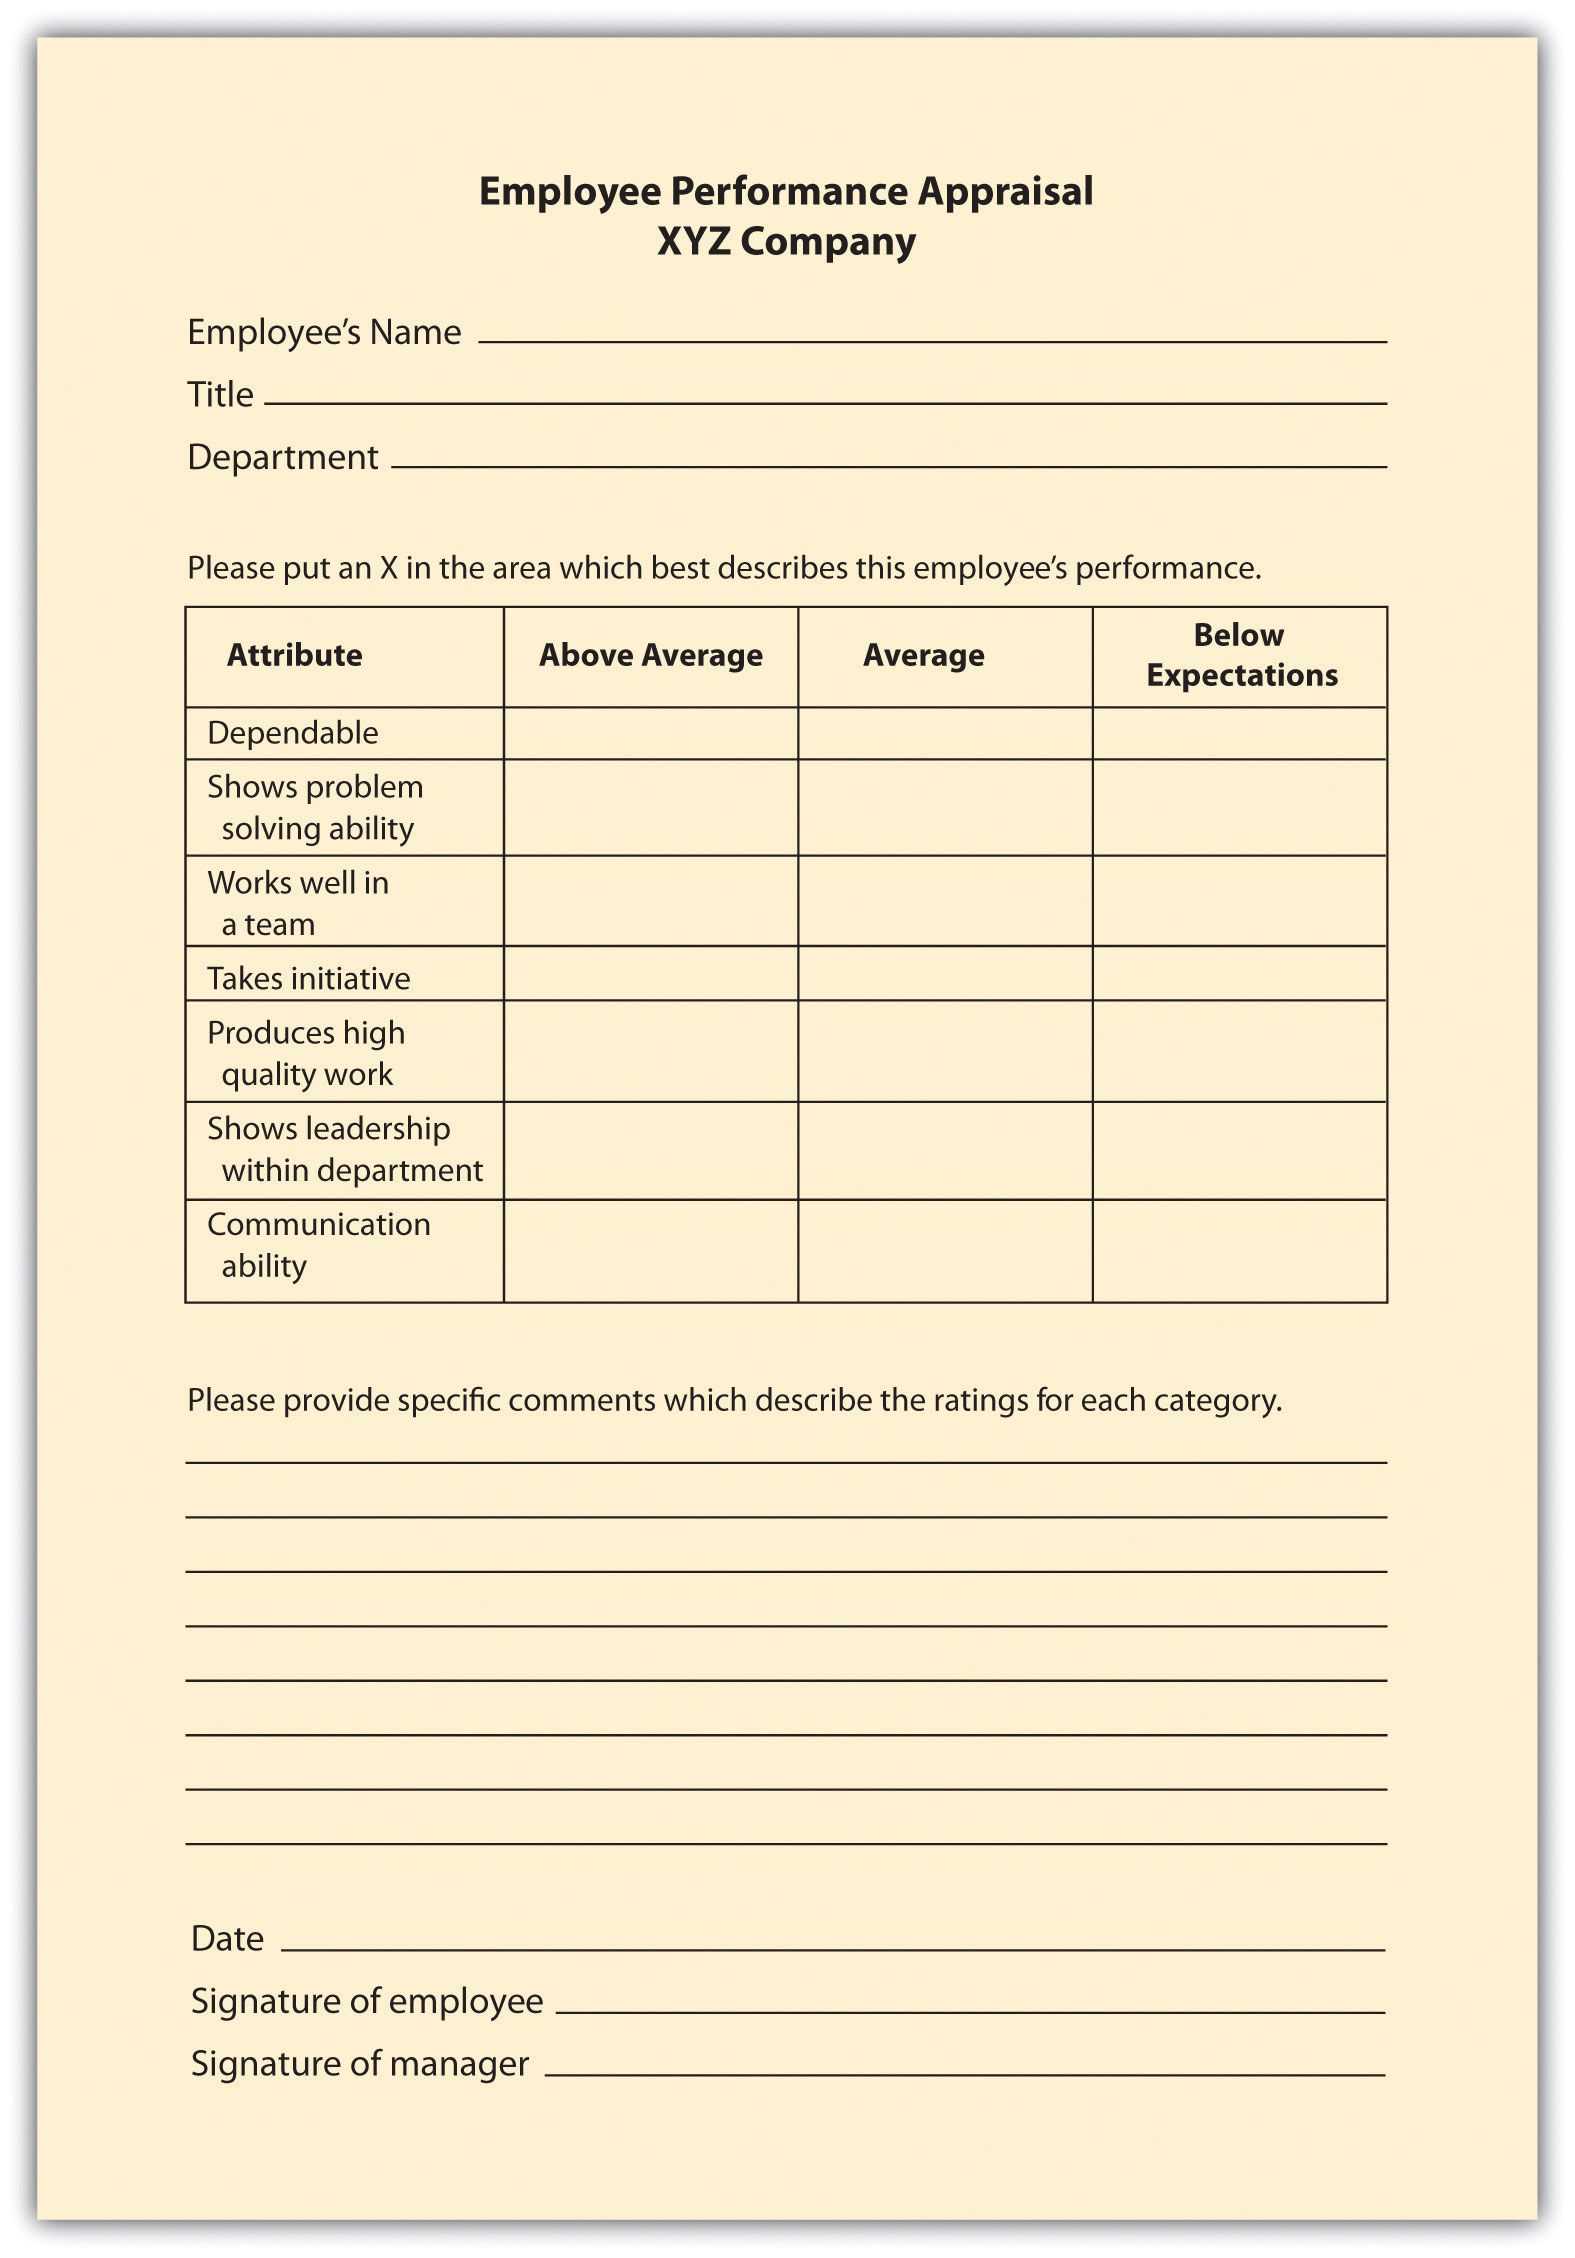 Examples Of Performance Appraisal Graphic Rating Scale Within Staff Progress Report Template